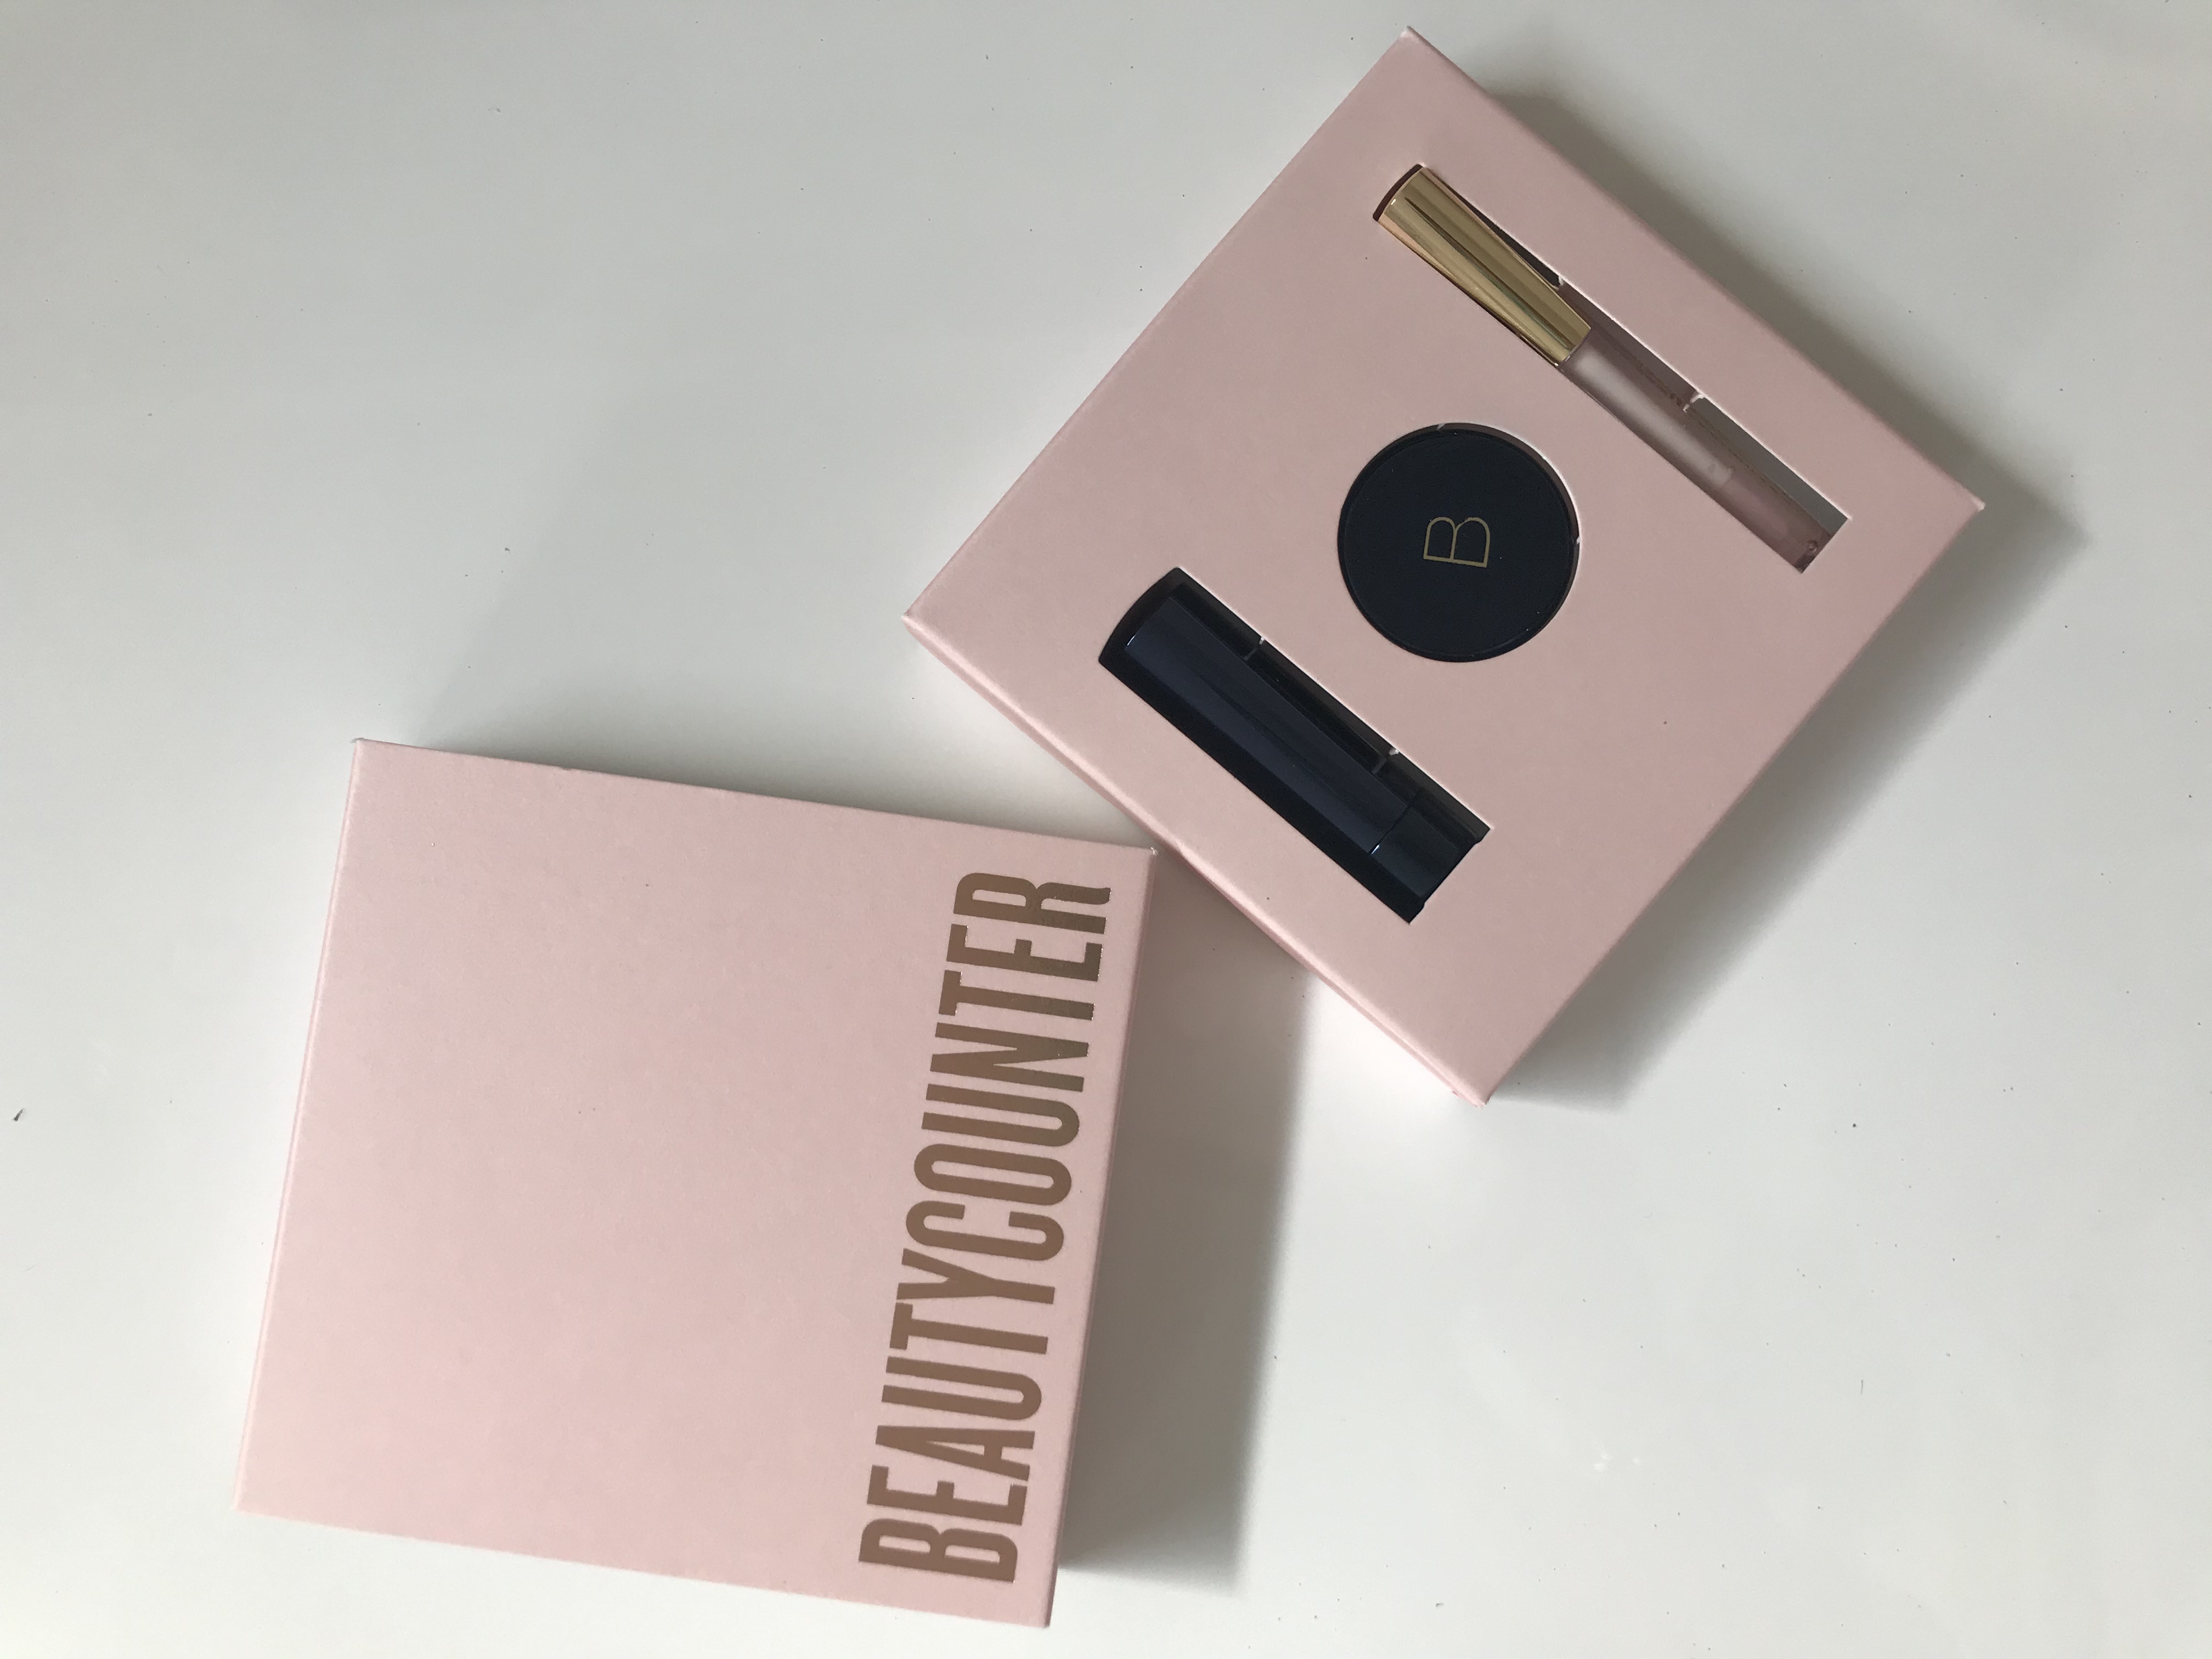 Beautycounter holiday collection. Lip kit gift for holiday. Gifts for her under $50